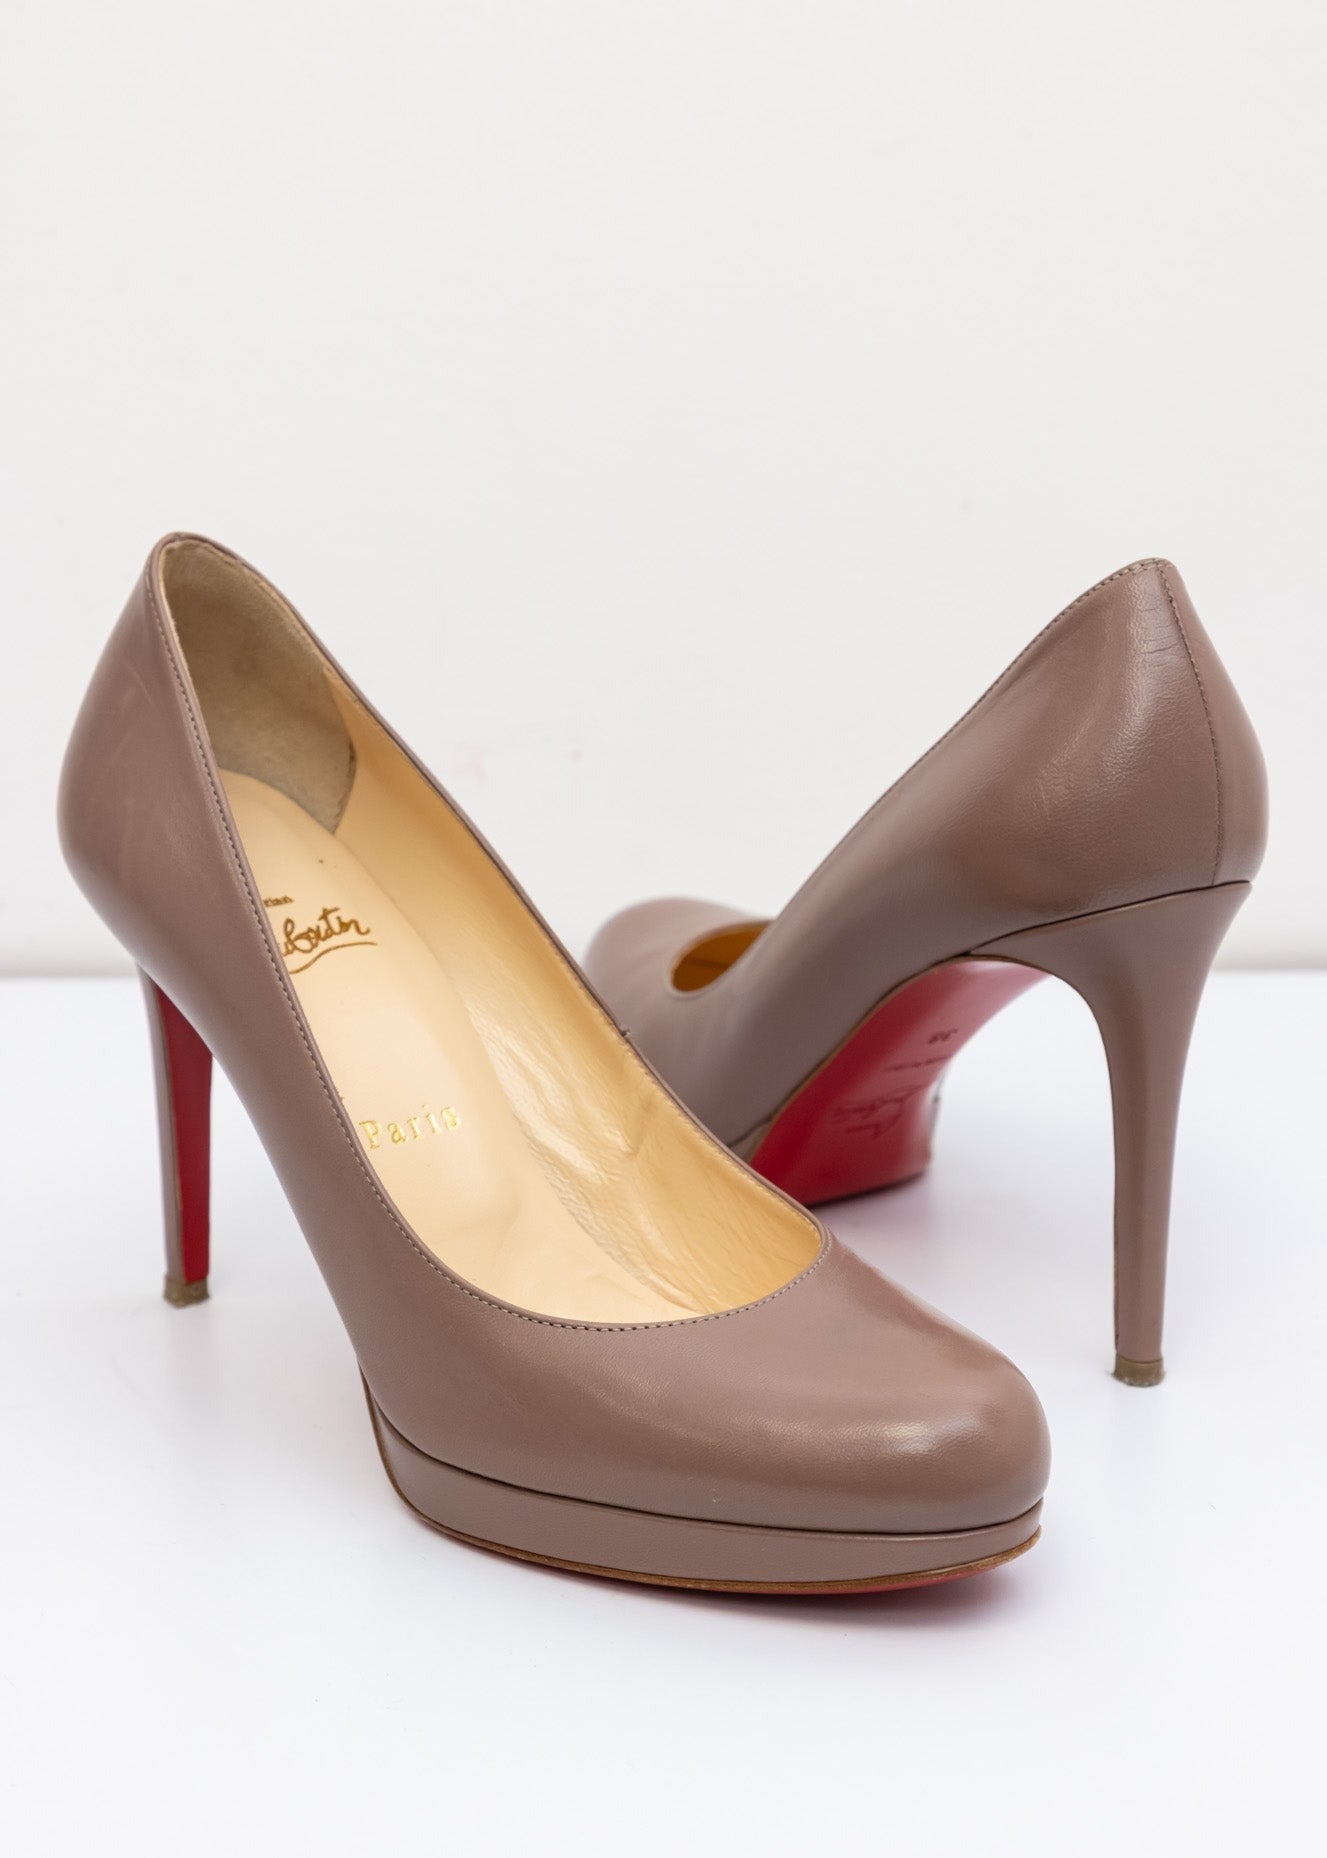 CHRISTIAN LOUBOUTIN Brown Leather Round Toe Platform Pumps | Size IT 38 | Excellent Condition | Made in Italy